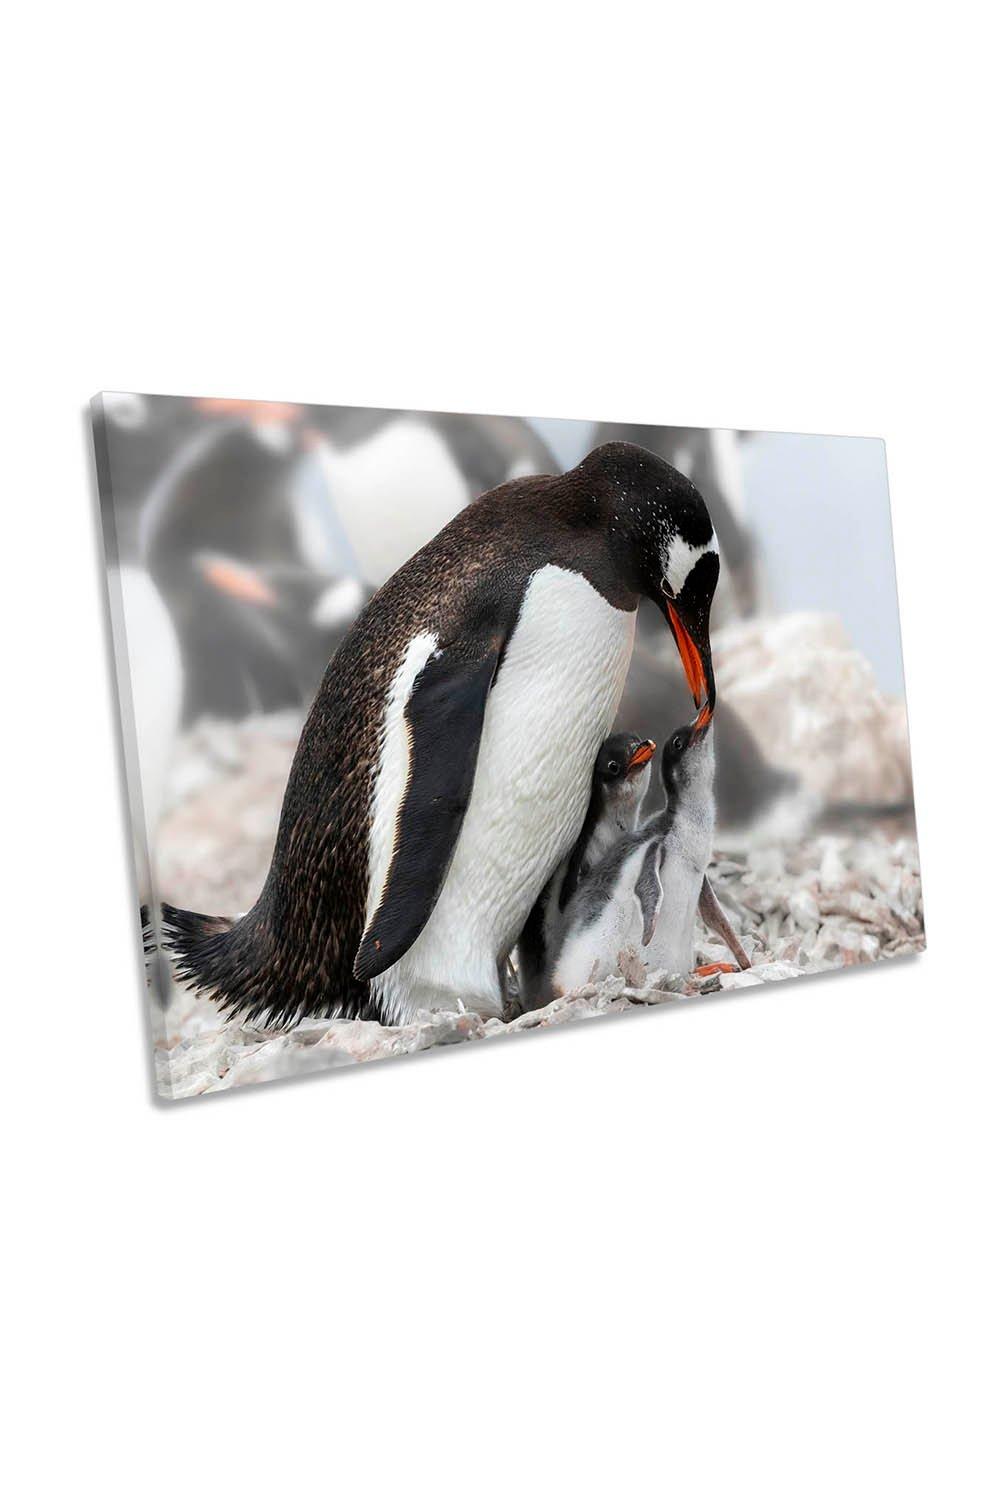 I am Hungry Penguin Family Canvas Wall Art Picture Print